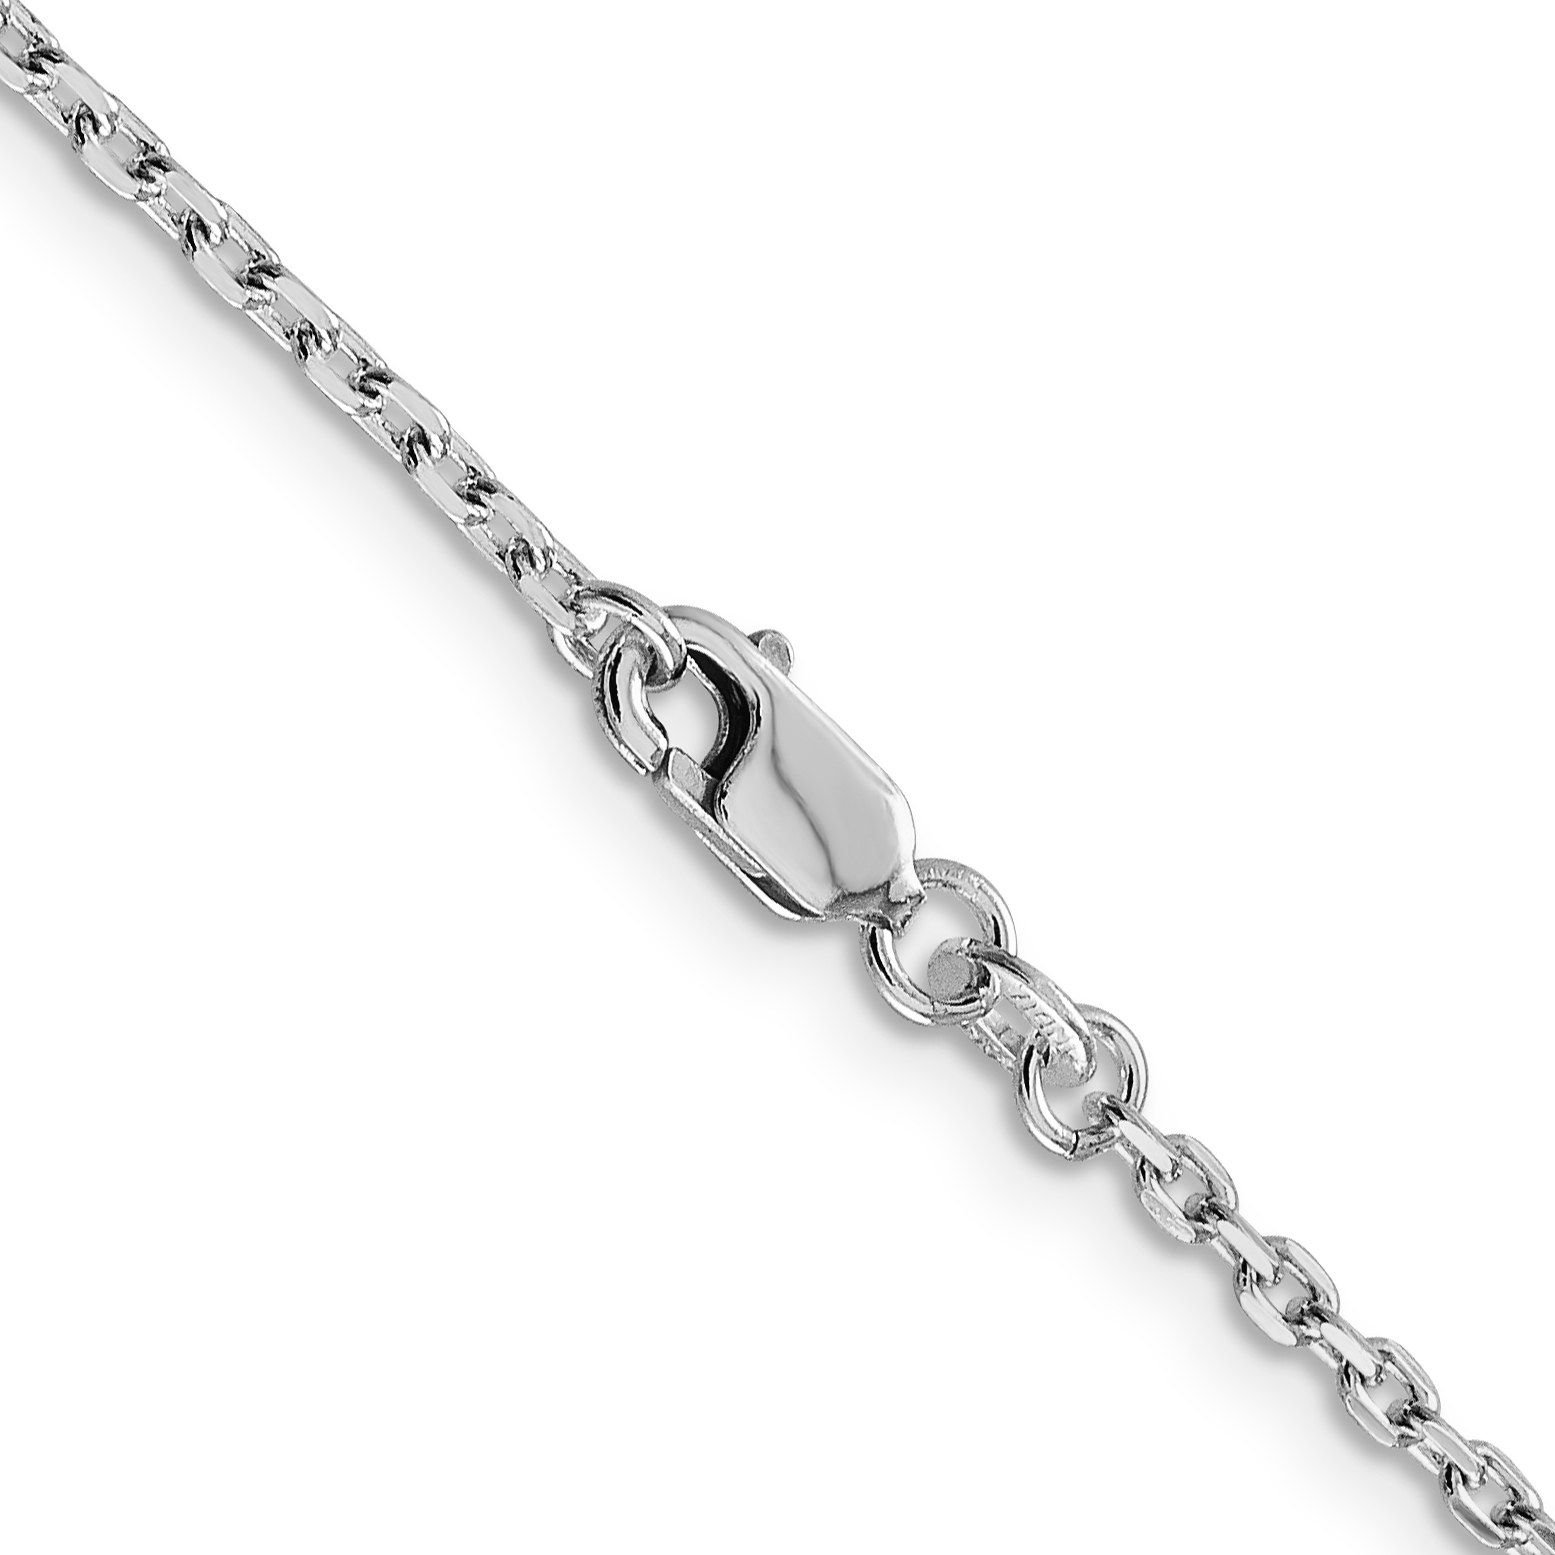 Sterling Silver 2mm Beveled Oval Cable Chain